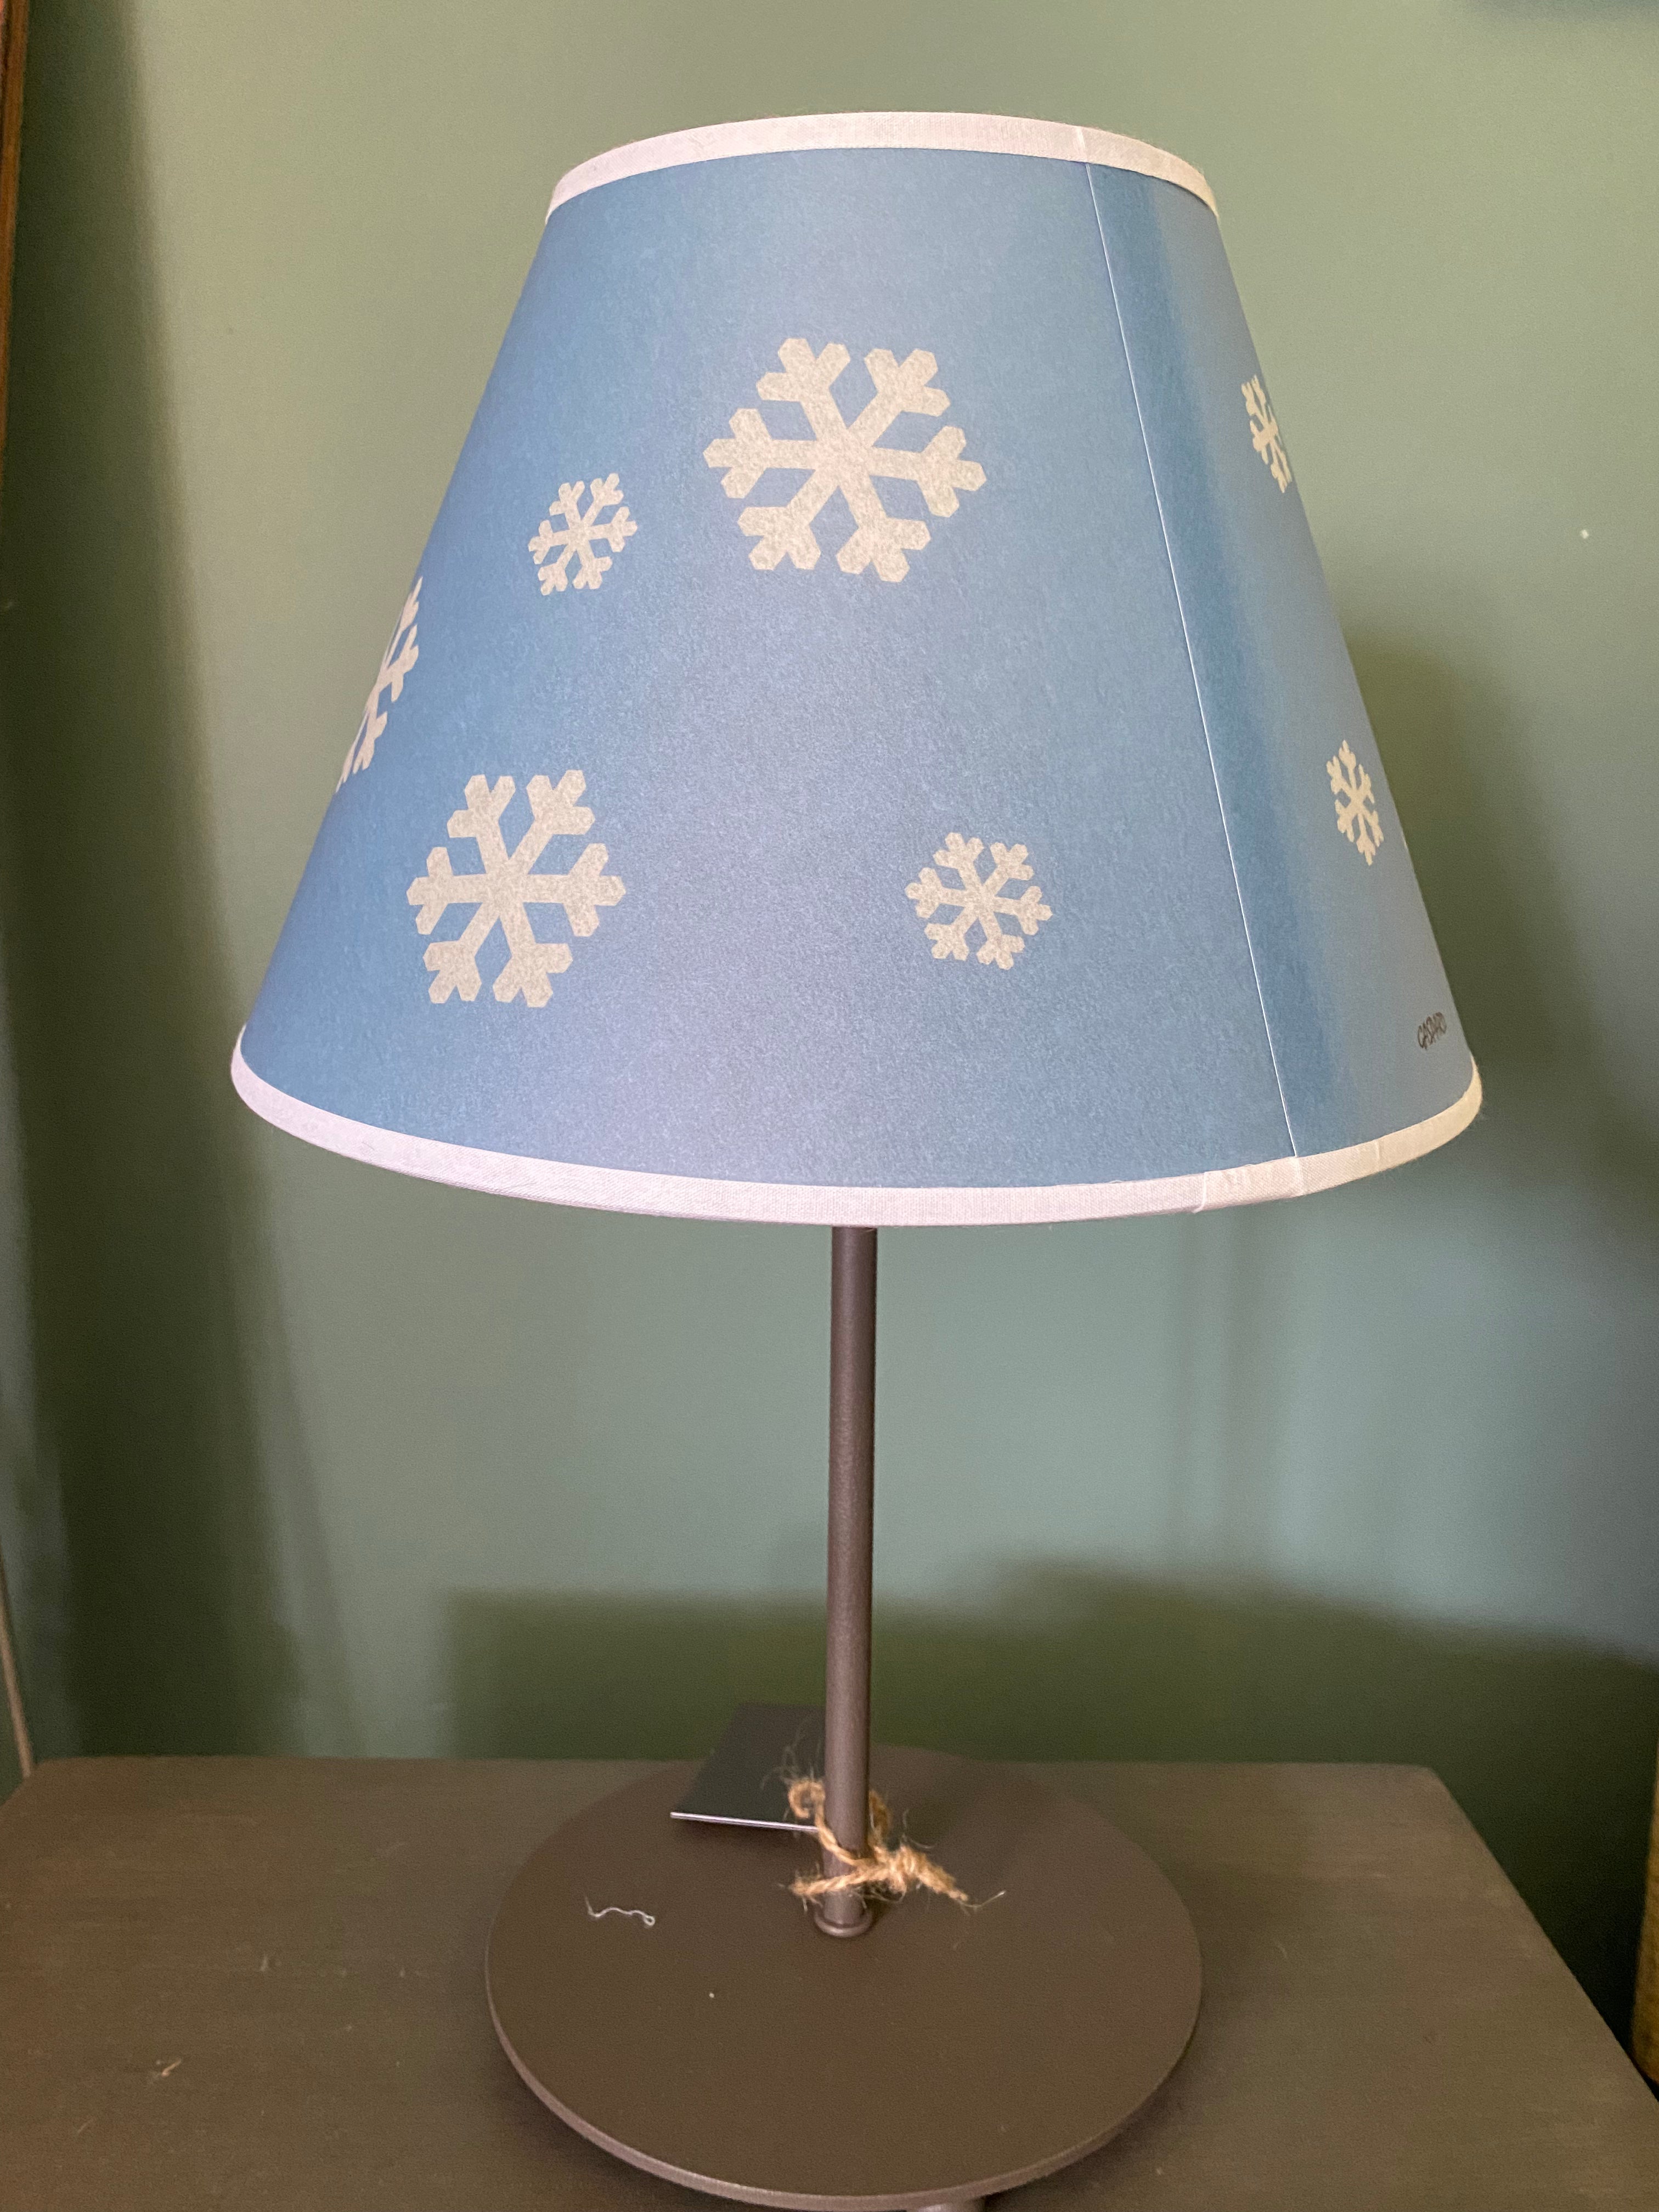 lamp with a round brown metal base supporting a metal rod, topped by snowflake printed canvas lamp shade in blue and white. Sitting on a wooden table against a green painted wall.